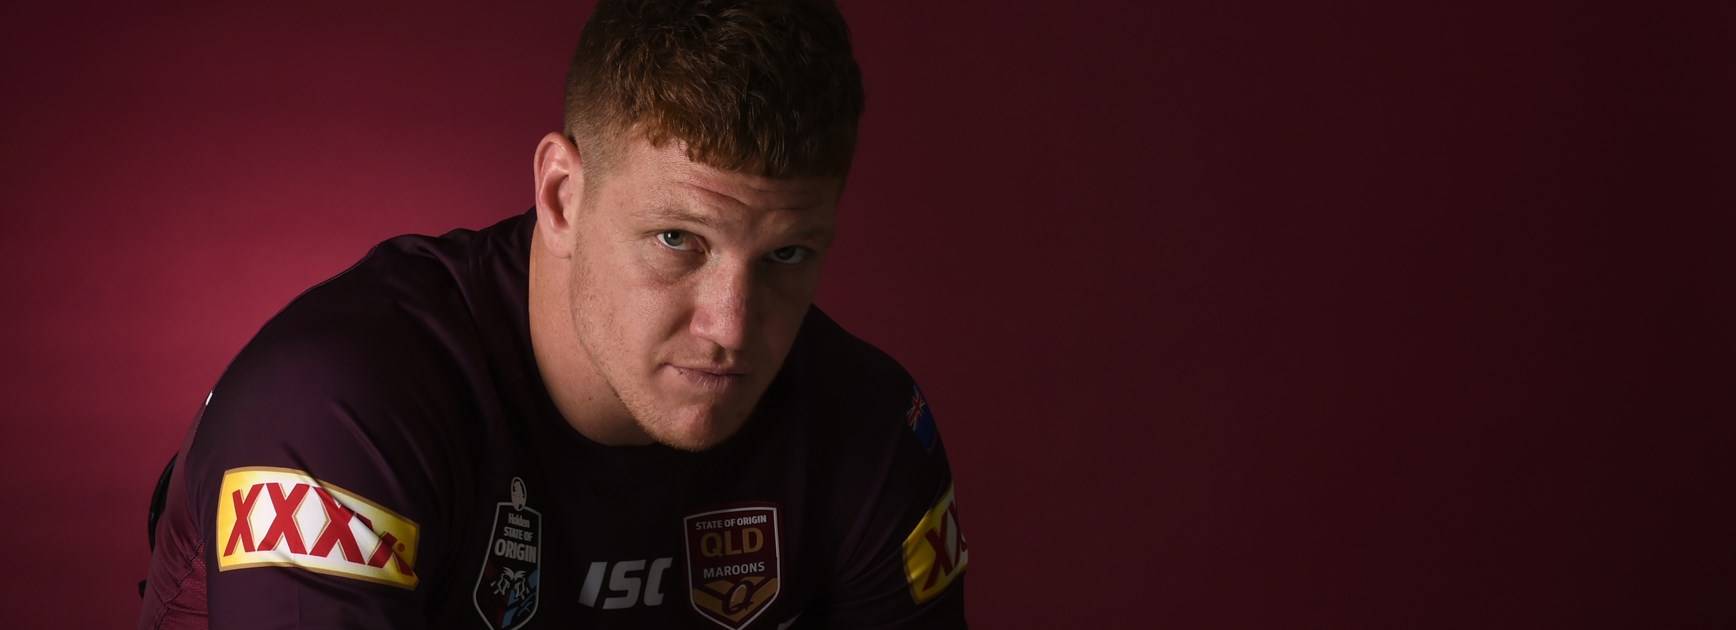 Maroons Origin team: Napa promoted as Wallace, Glasby recalled